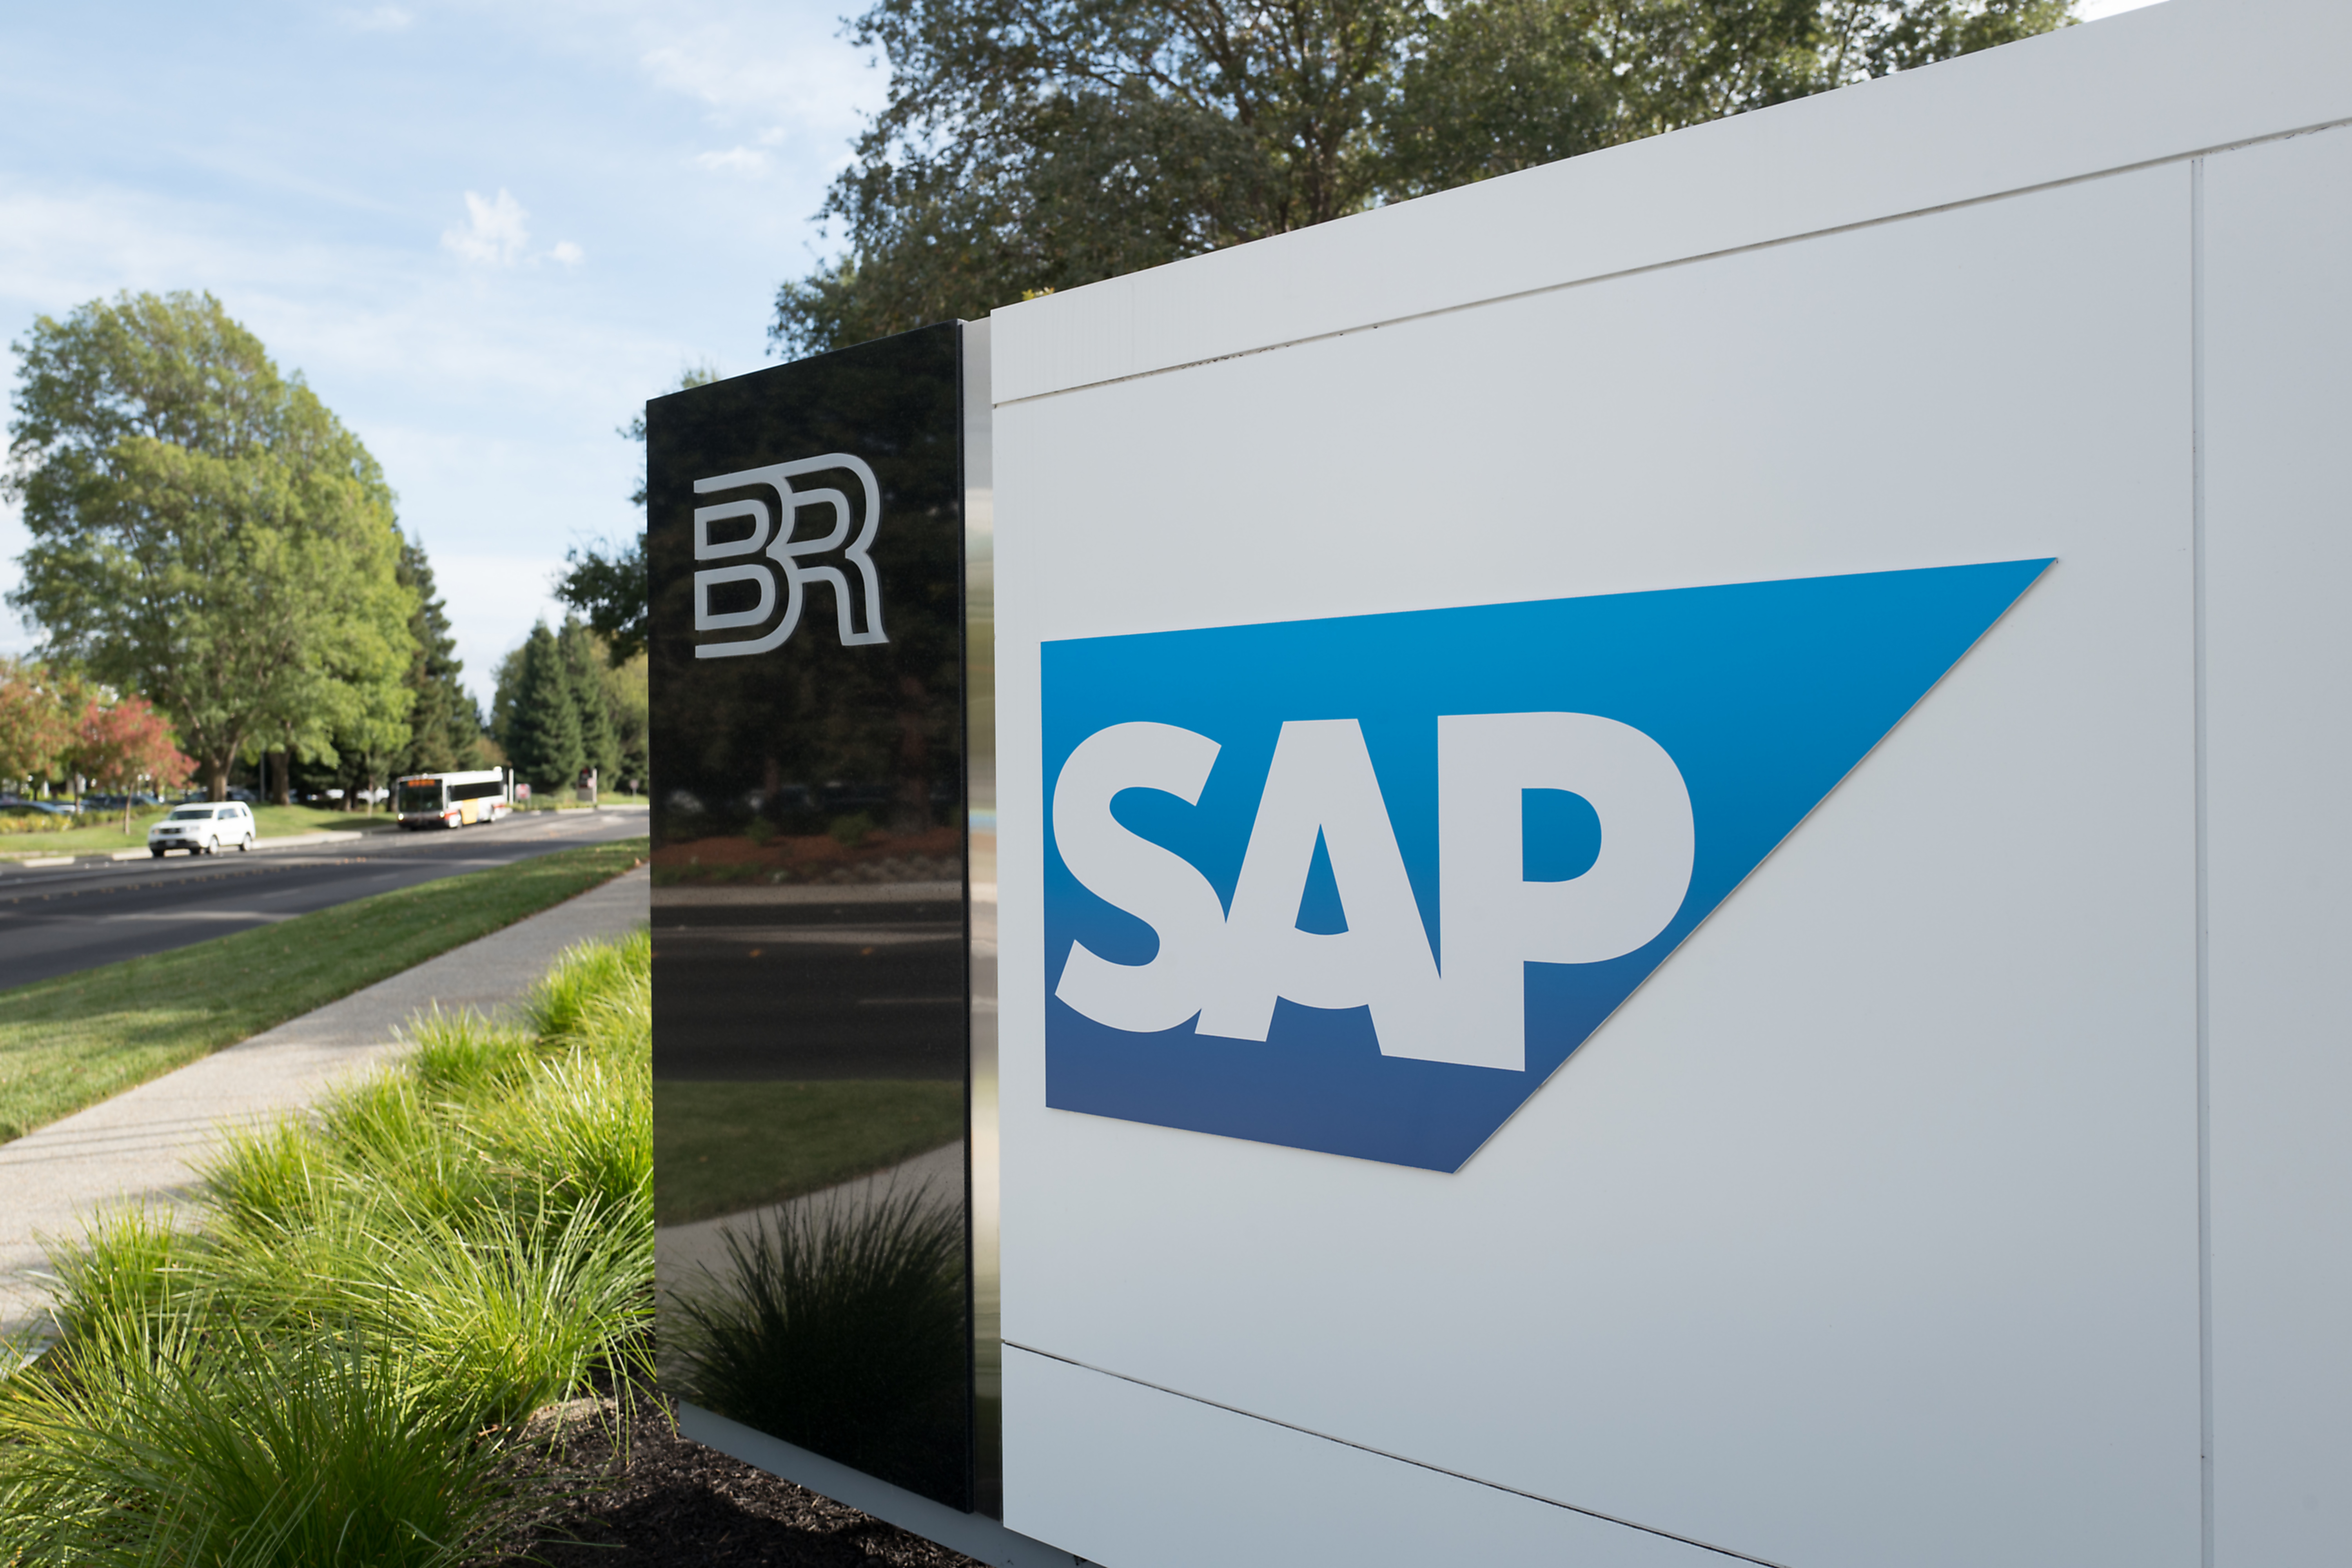 Germany’s software giant SAP keeps its Russian clients despite claims it shut down cloud services in Russia